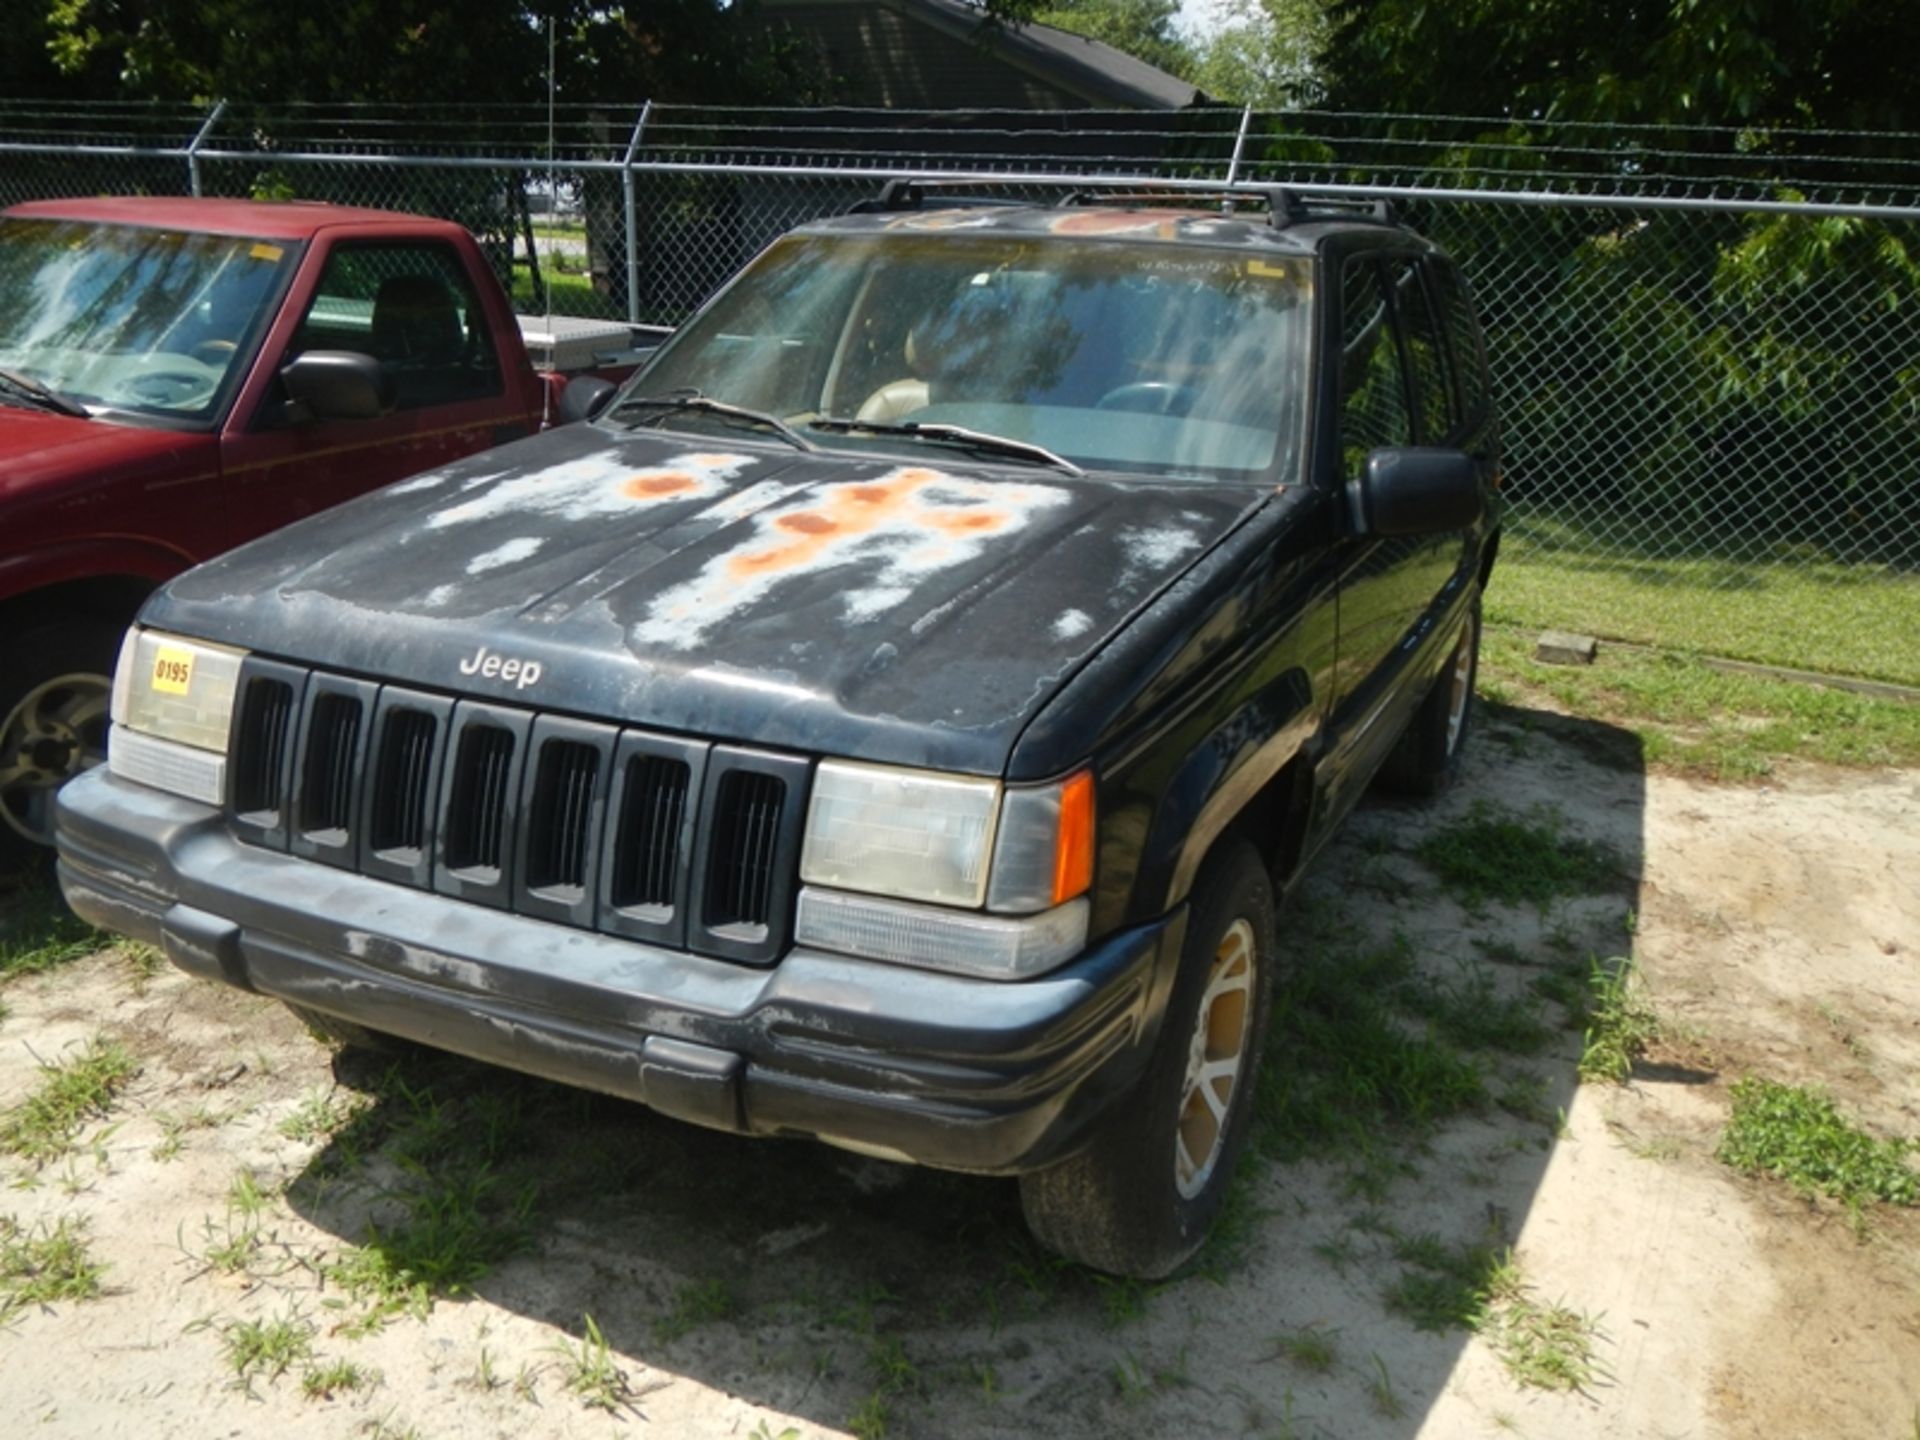 1996 JEEP GRAND CHEROKEE Limited 4WD (not running) VIN 1J4GZ78Y9TC212870 - MILES unknown. VIN